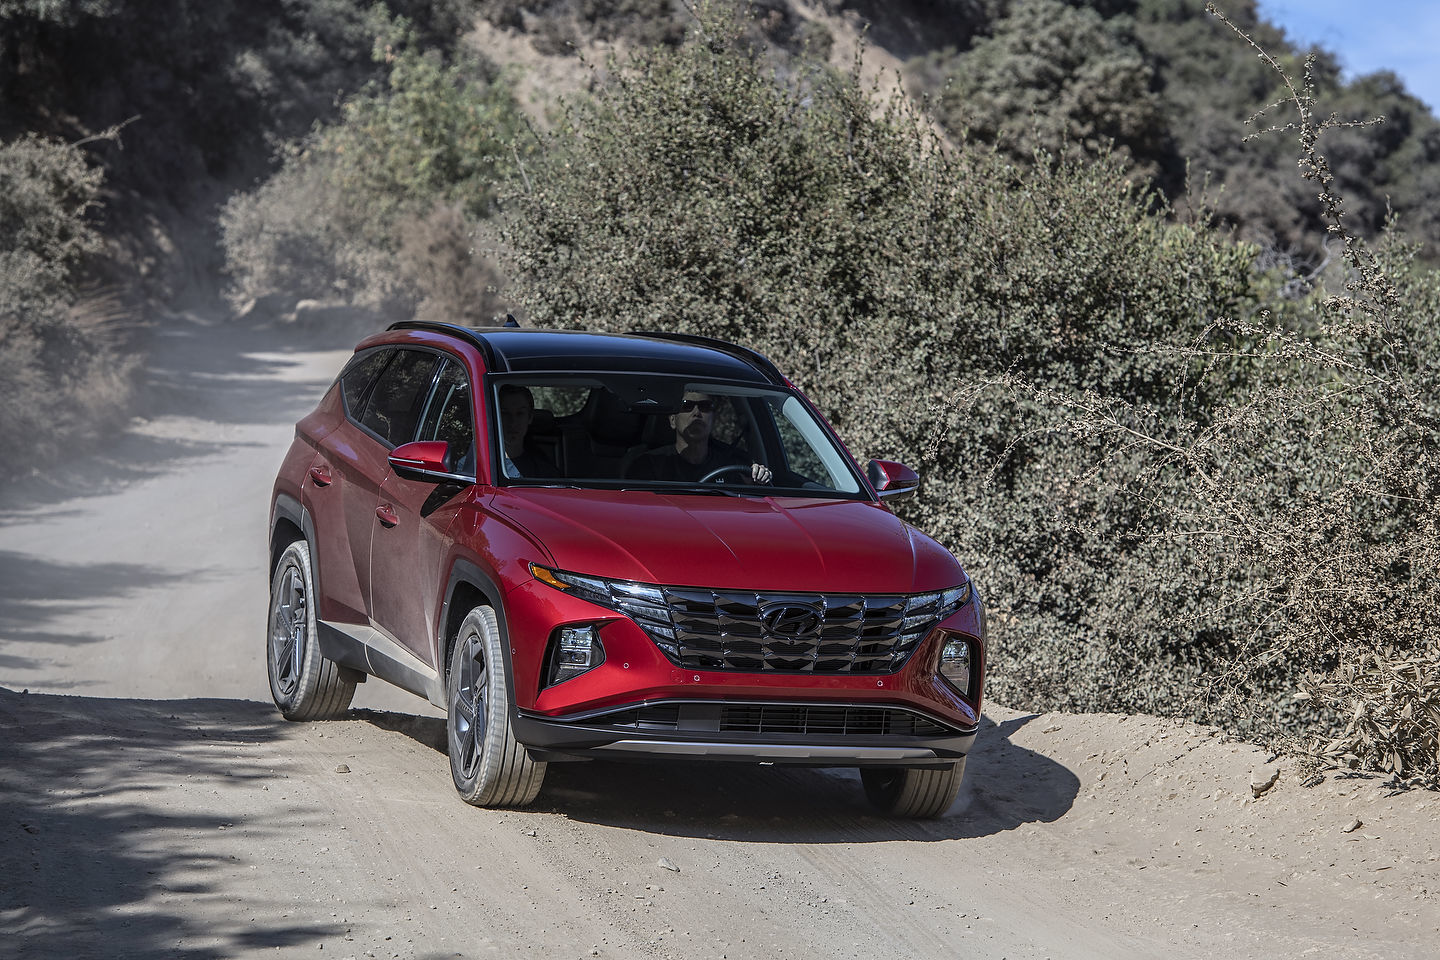 The main differences between the 2022 Hyundai Tucson and 2021 Toyota RAV4